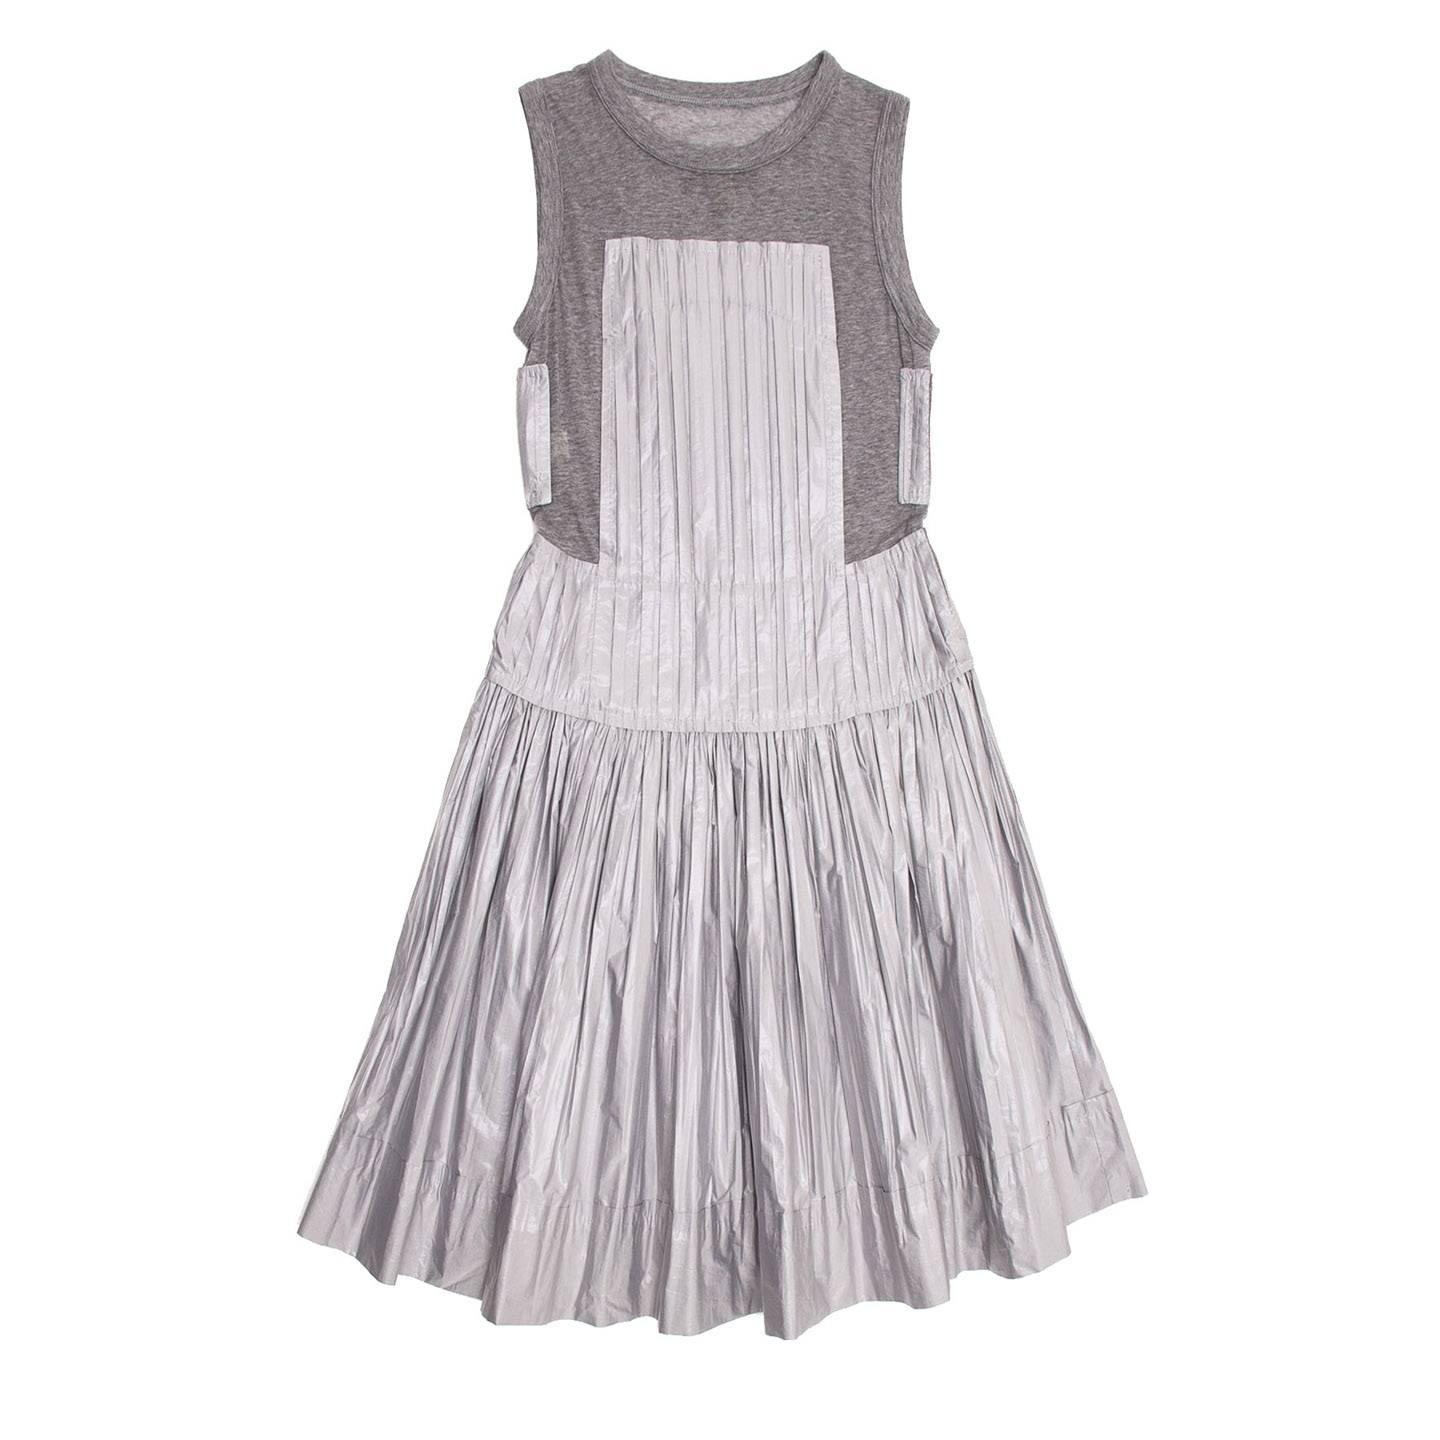 Light grey paper silk pleated dress with grey melange jersey tank-top insert. The top part fits well and the knee length skirt opens with an A-line volume.

Size  42 French sizing

Condition  Excellent: never worn